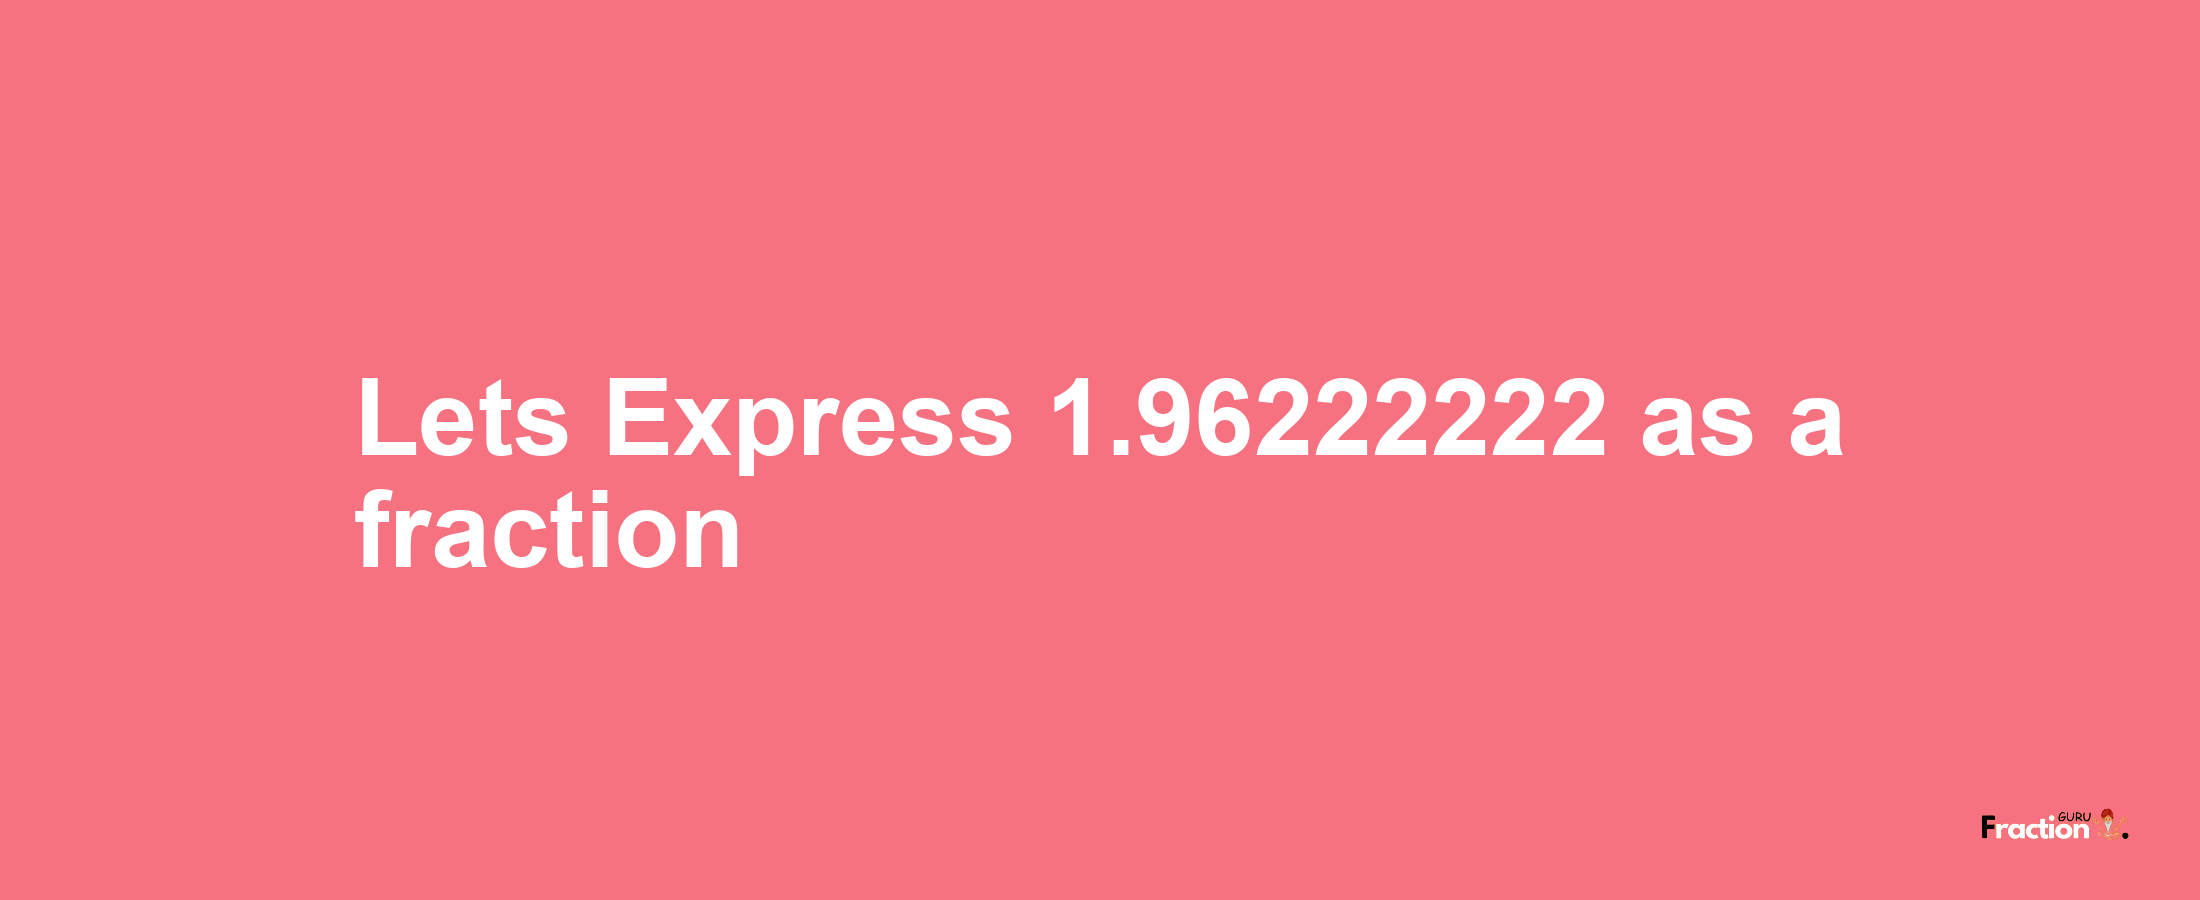 Lets Express 1.96222222 as afraction